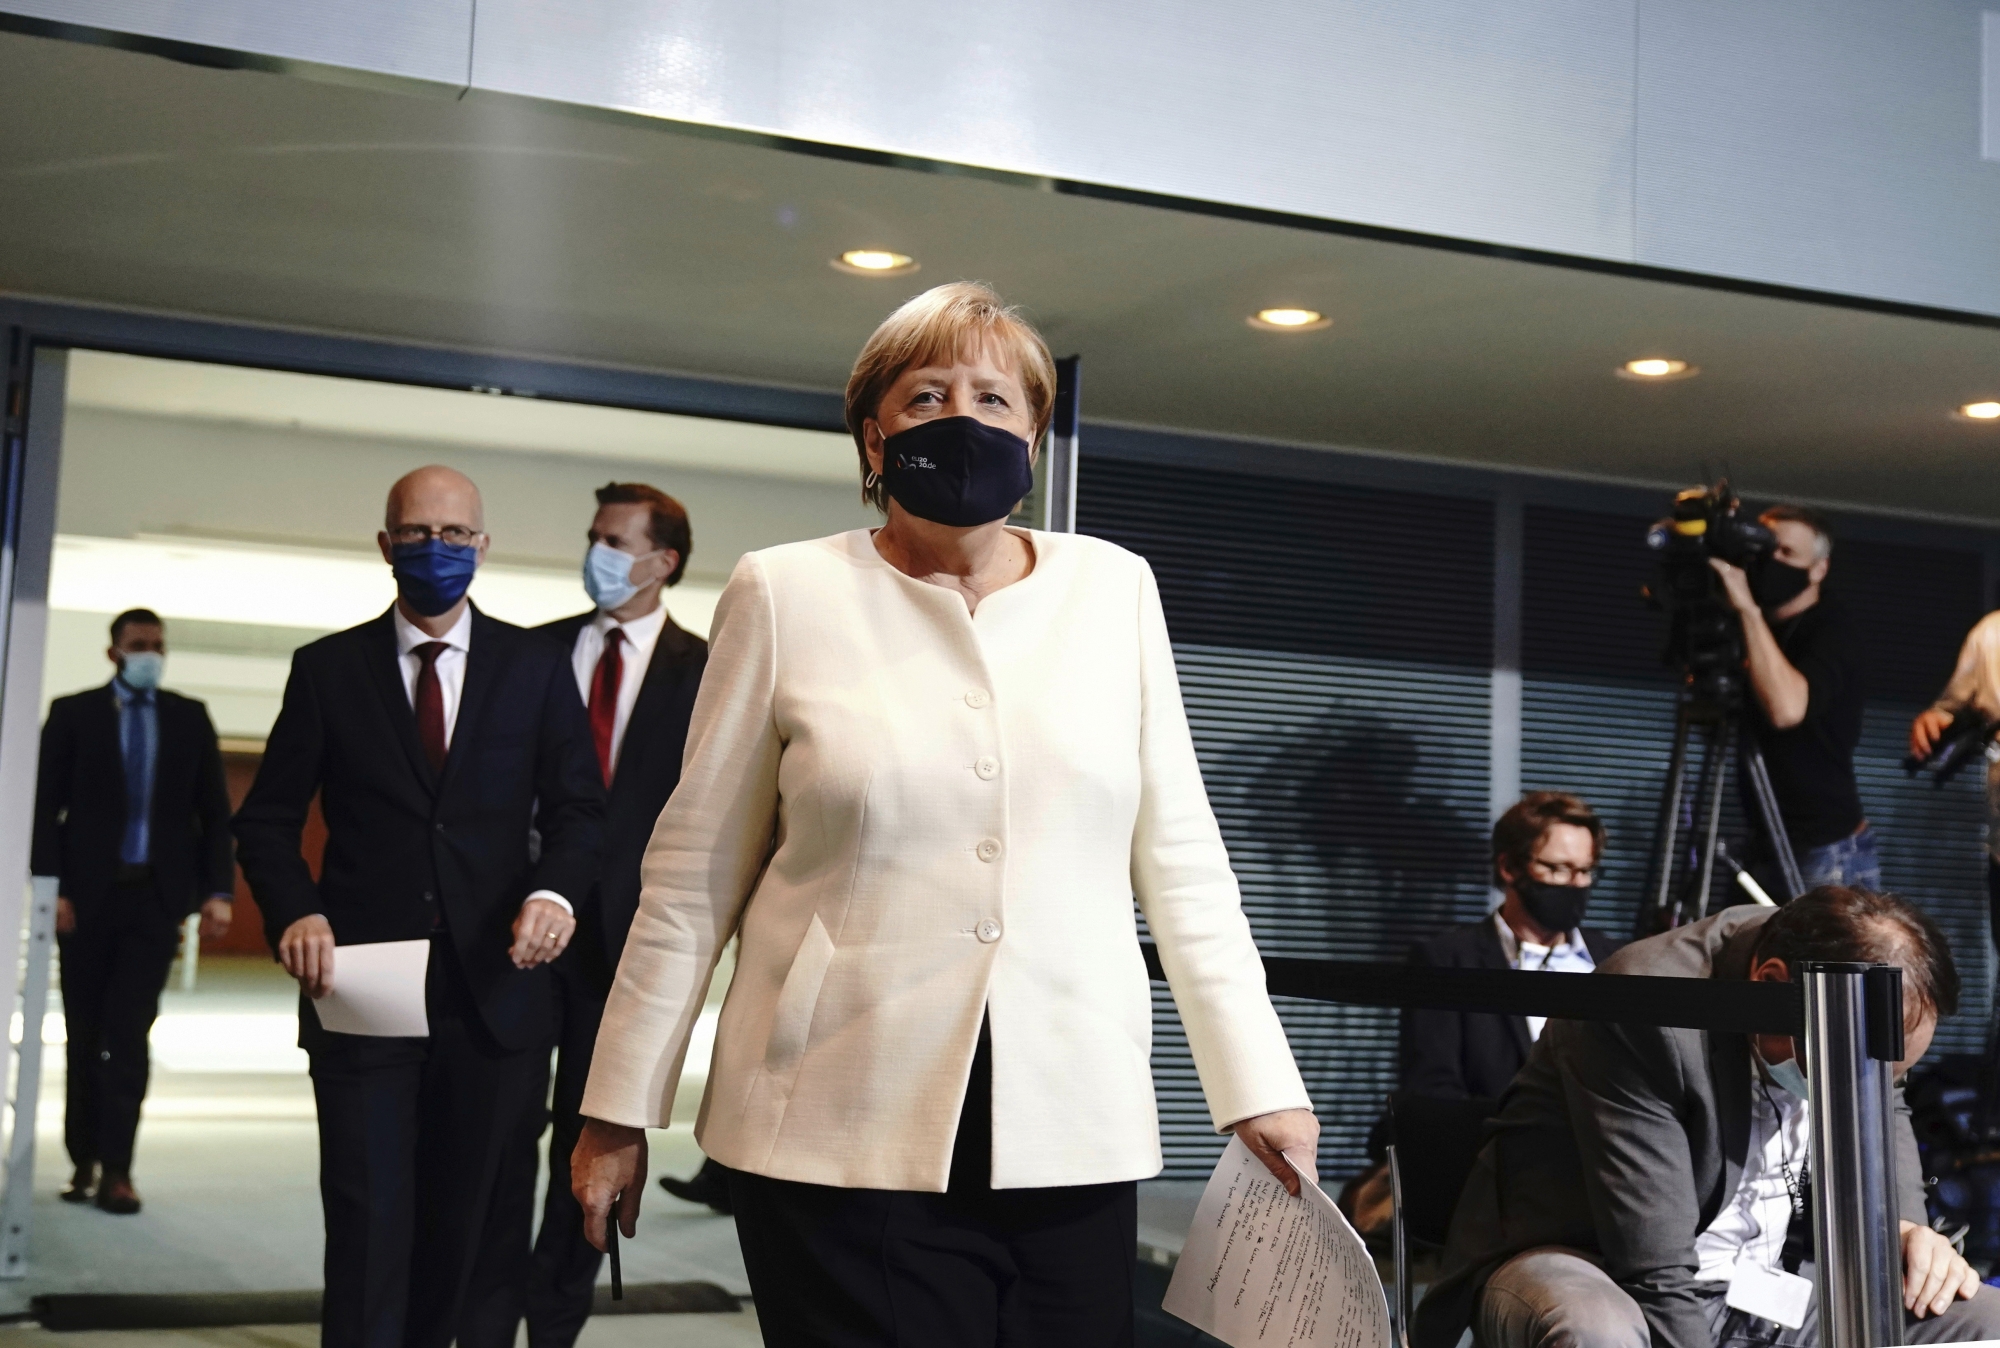 German Chancellor Angela Merkel, foreground arrives for a  coronavirus press conference, in Berlin, Tuesday, Sept. 29, 2020. Chancellor Angela Merkel and the governors of GermanyÄôs 16 states conferred on how to prevent the countryÄôs coronavirus infection figures from accelerating to the levels being seen in other European countries. (Kay Nietfeld/dpa via AP) ArcInfo